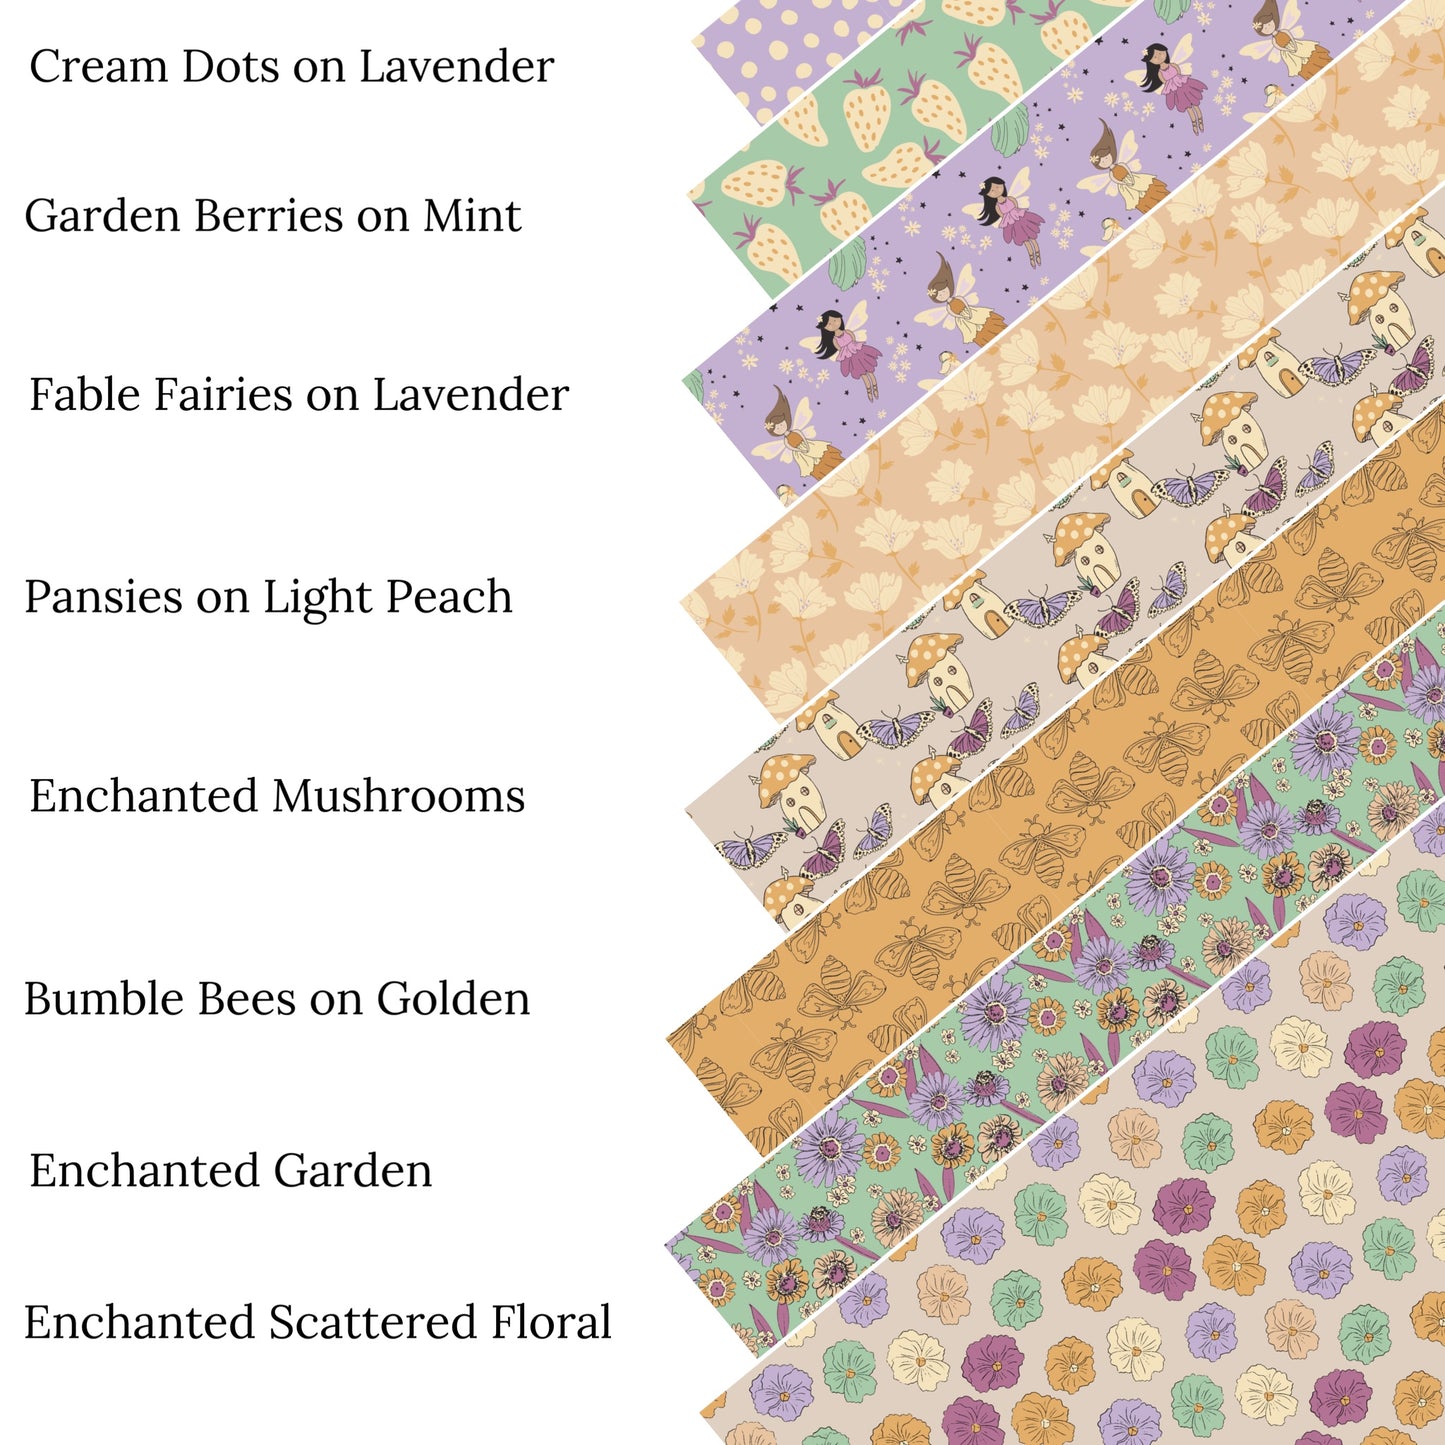 Enchanted Scattered Floral Faux Leather Sheets